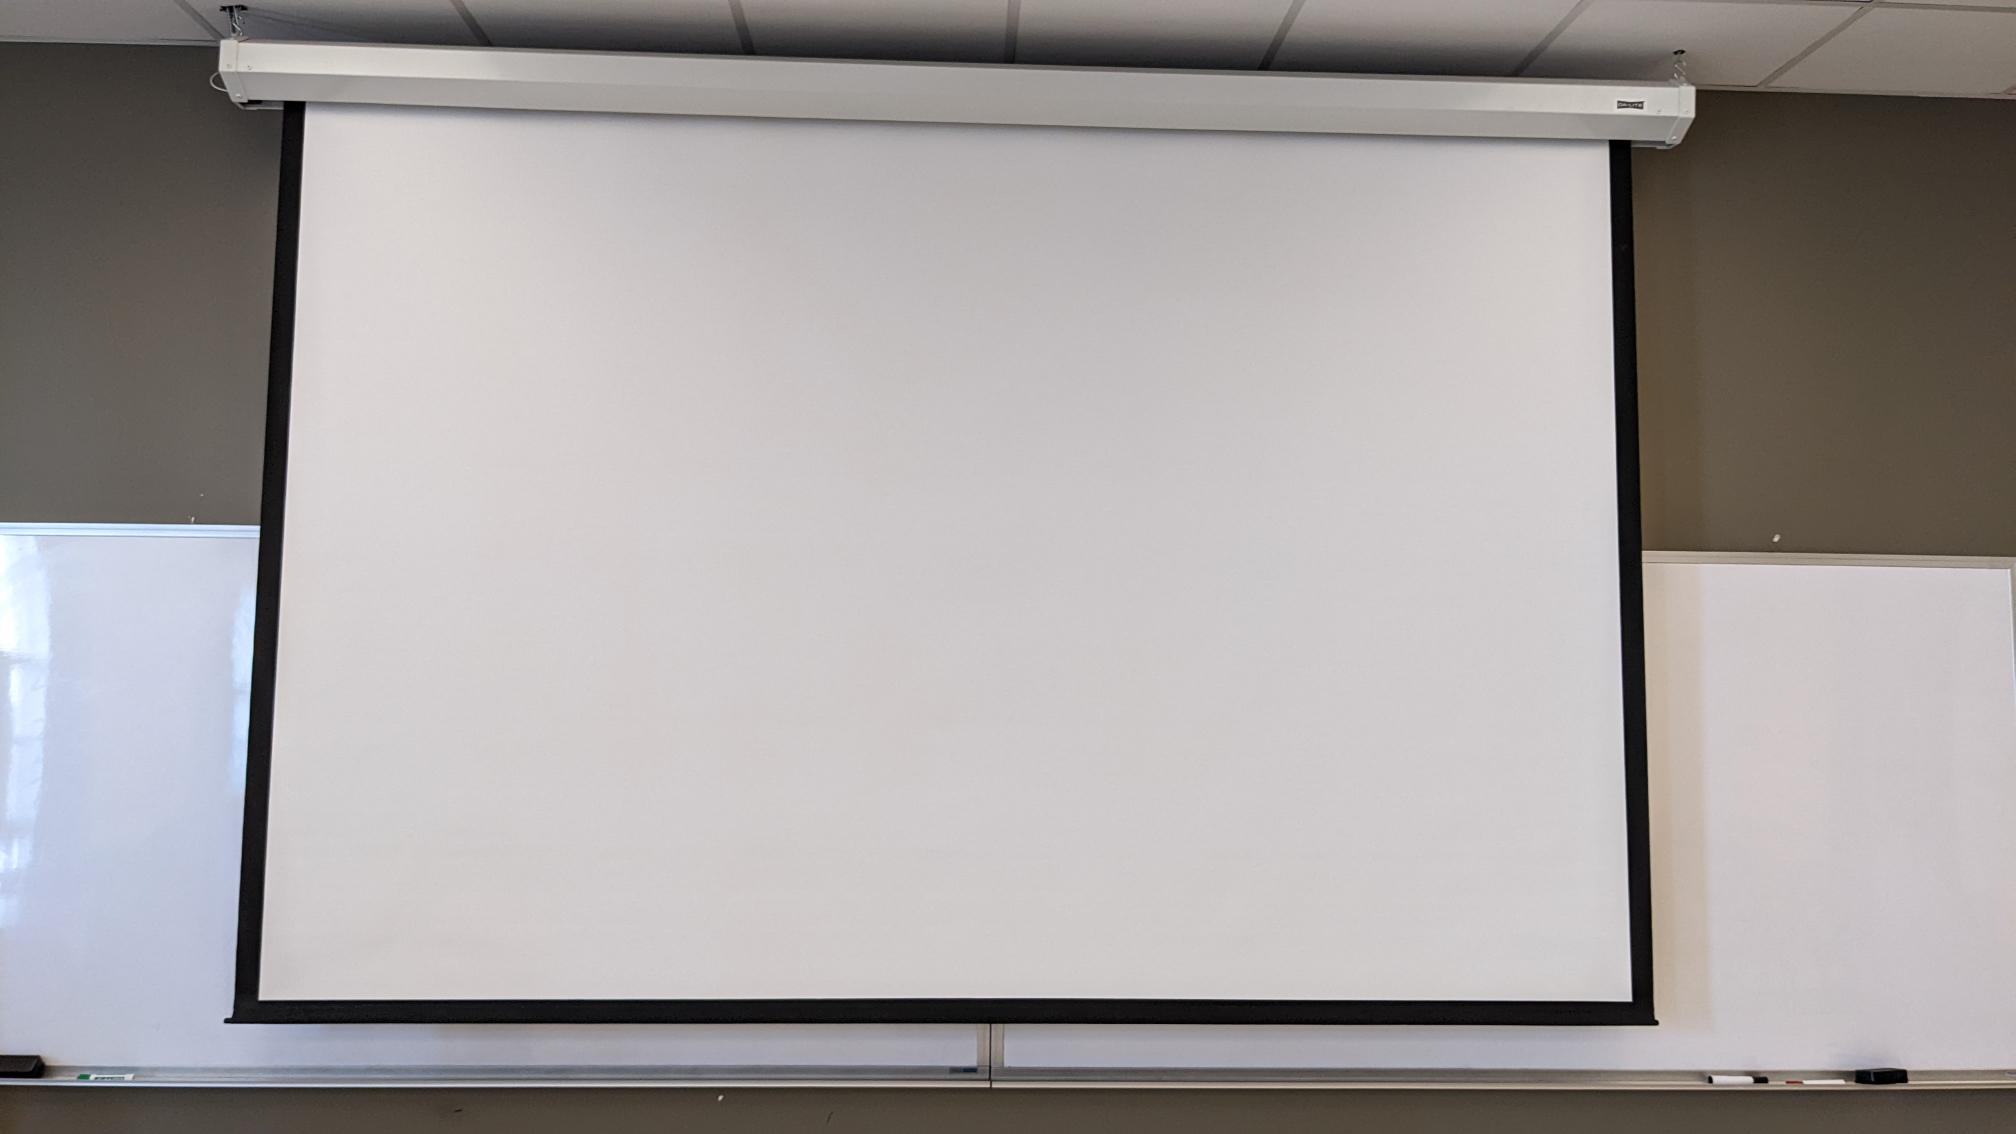 Electronically controlled projector screen